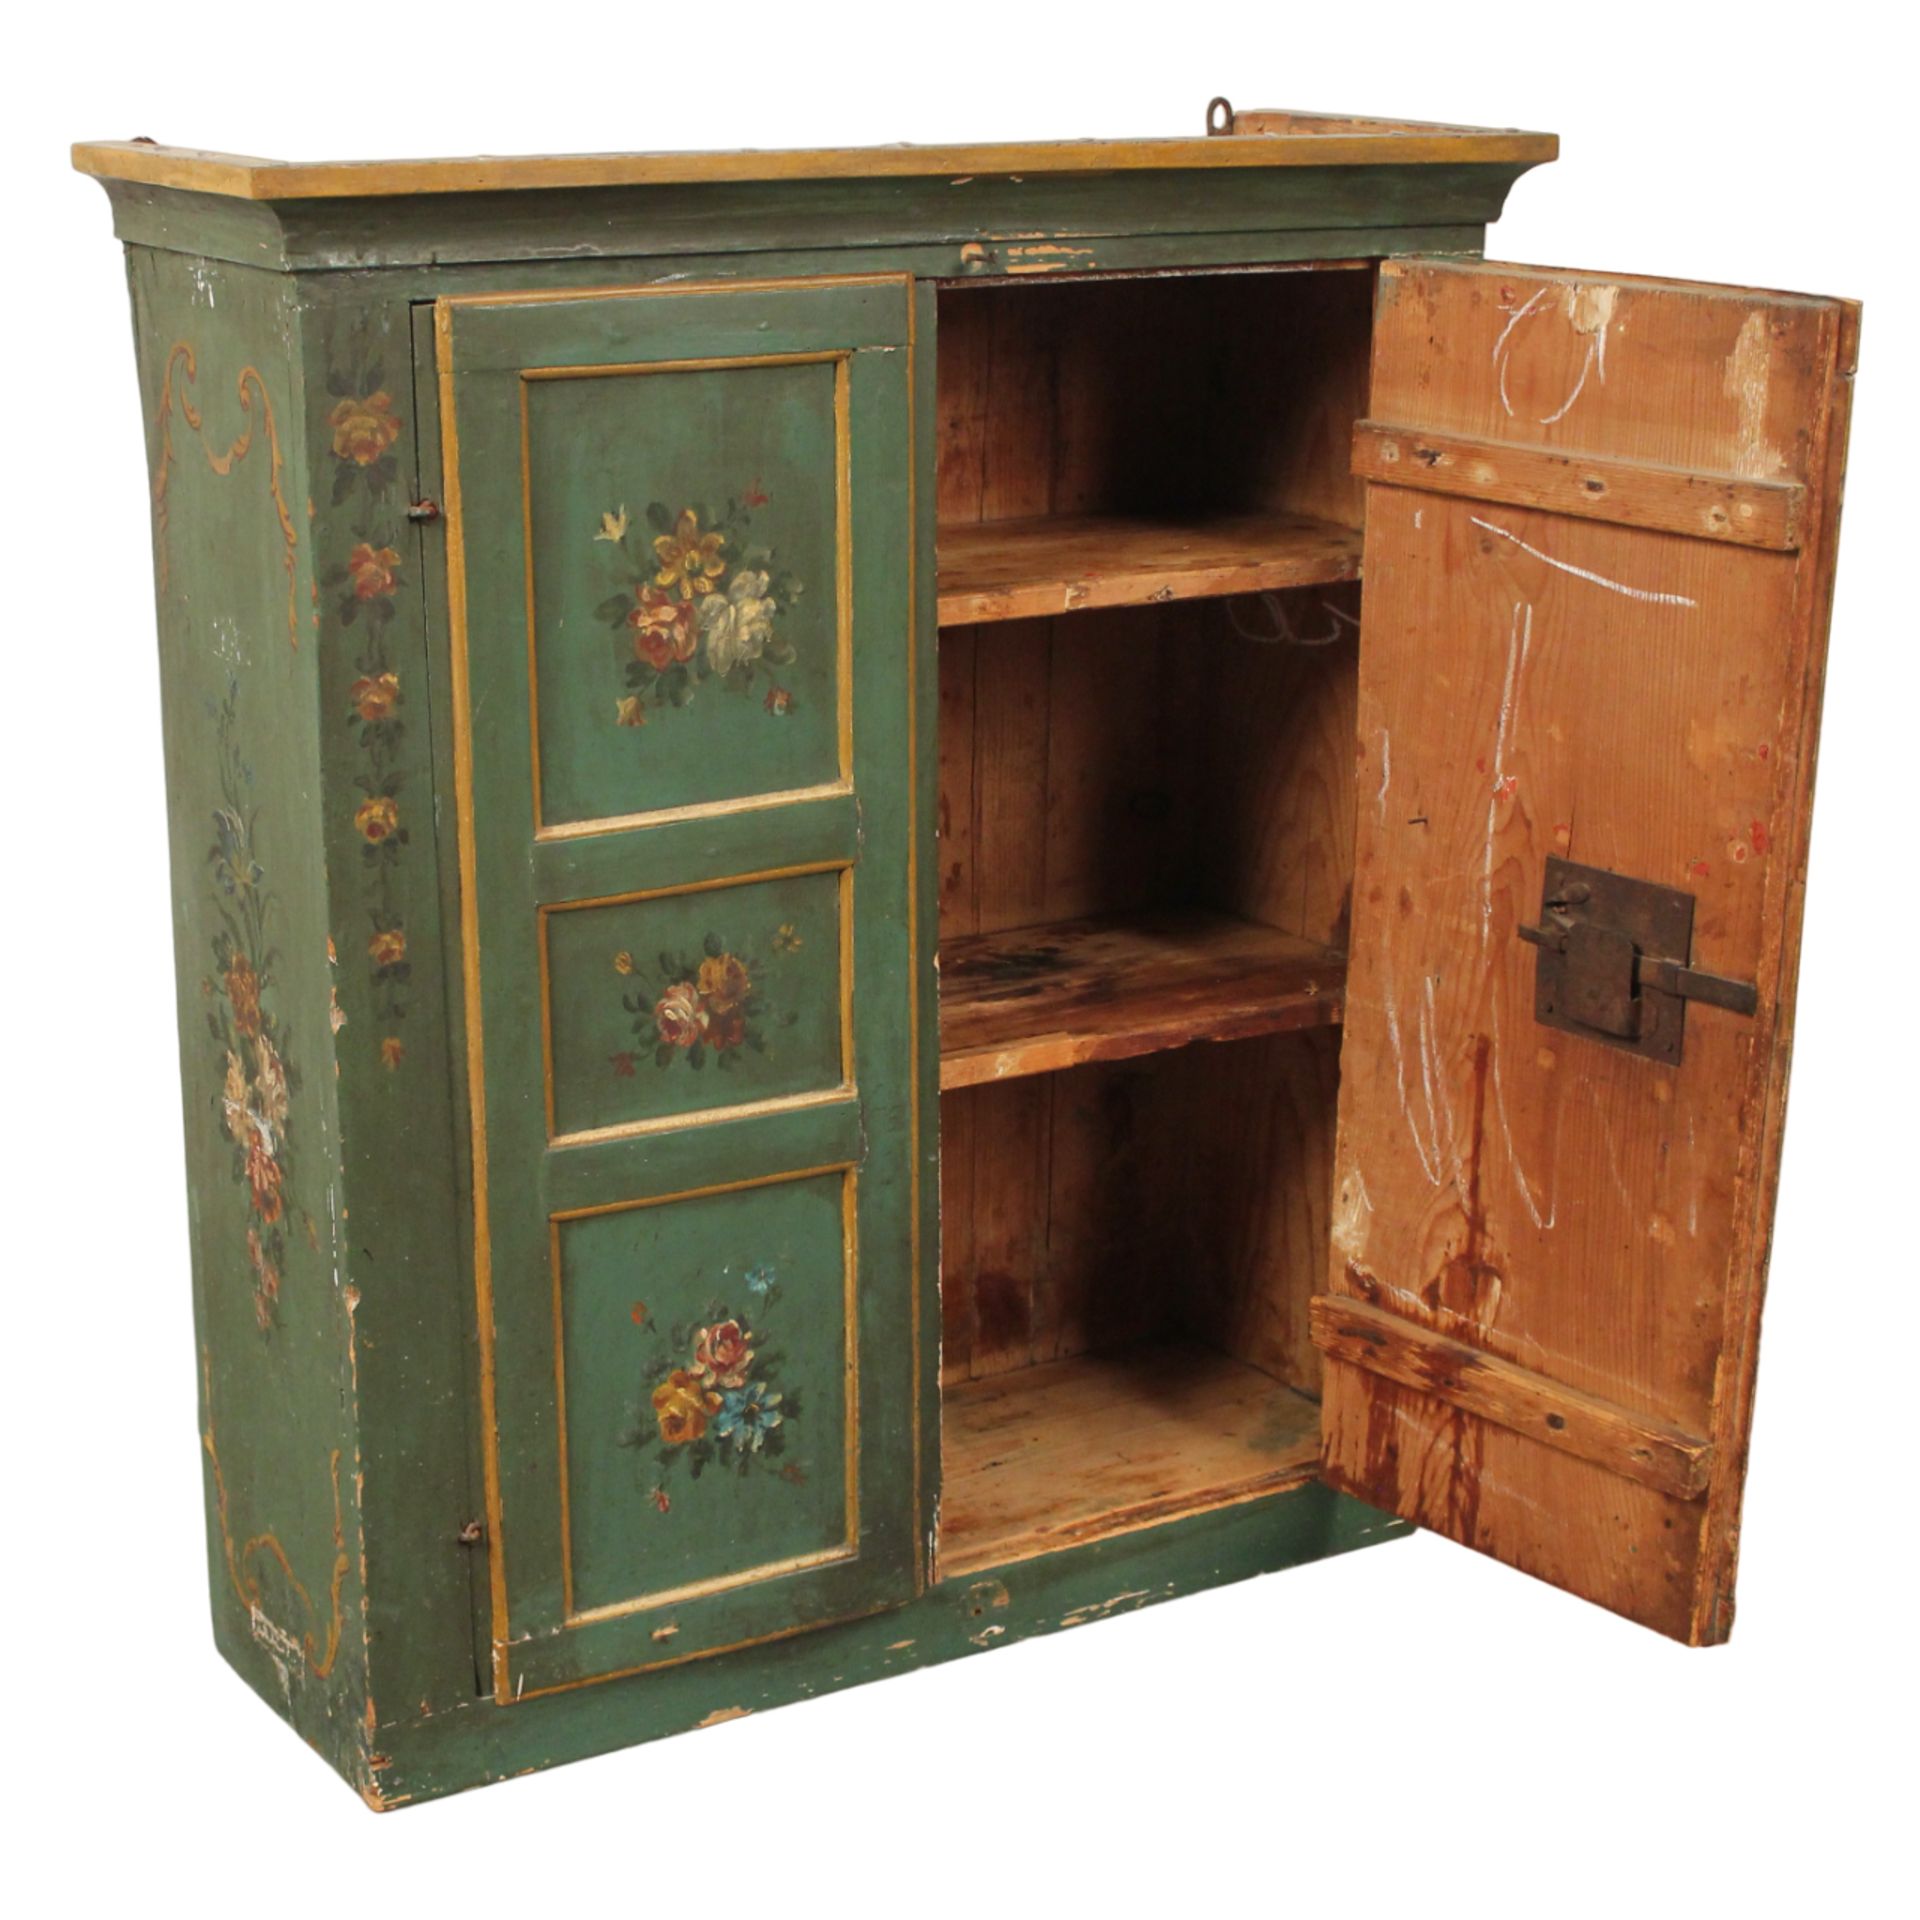 Stipo pensile a due ante - Wall cabinet with two doors - Image 2 of 3